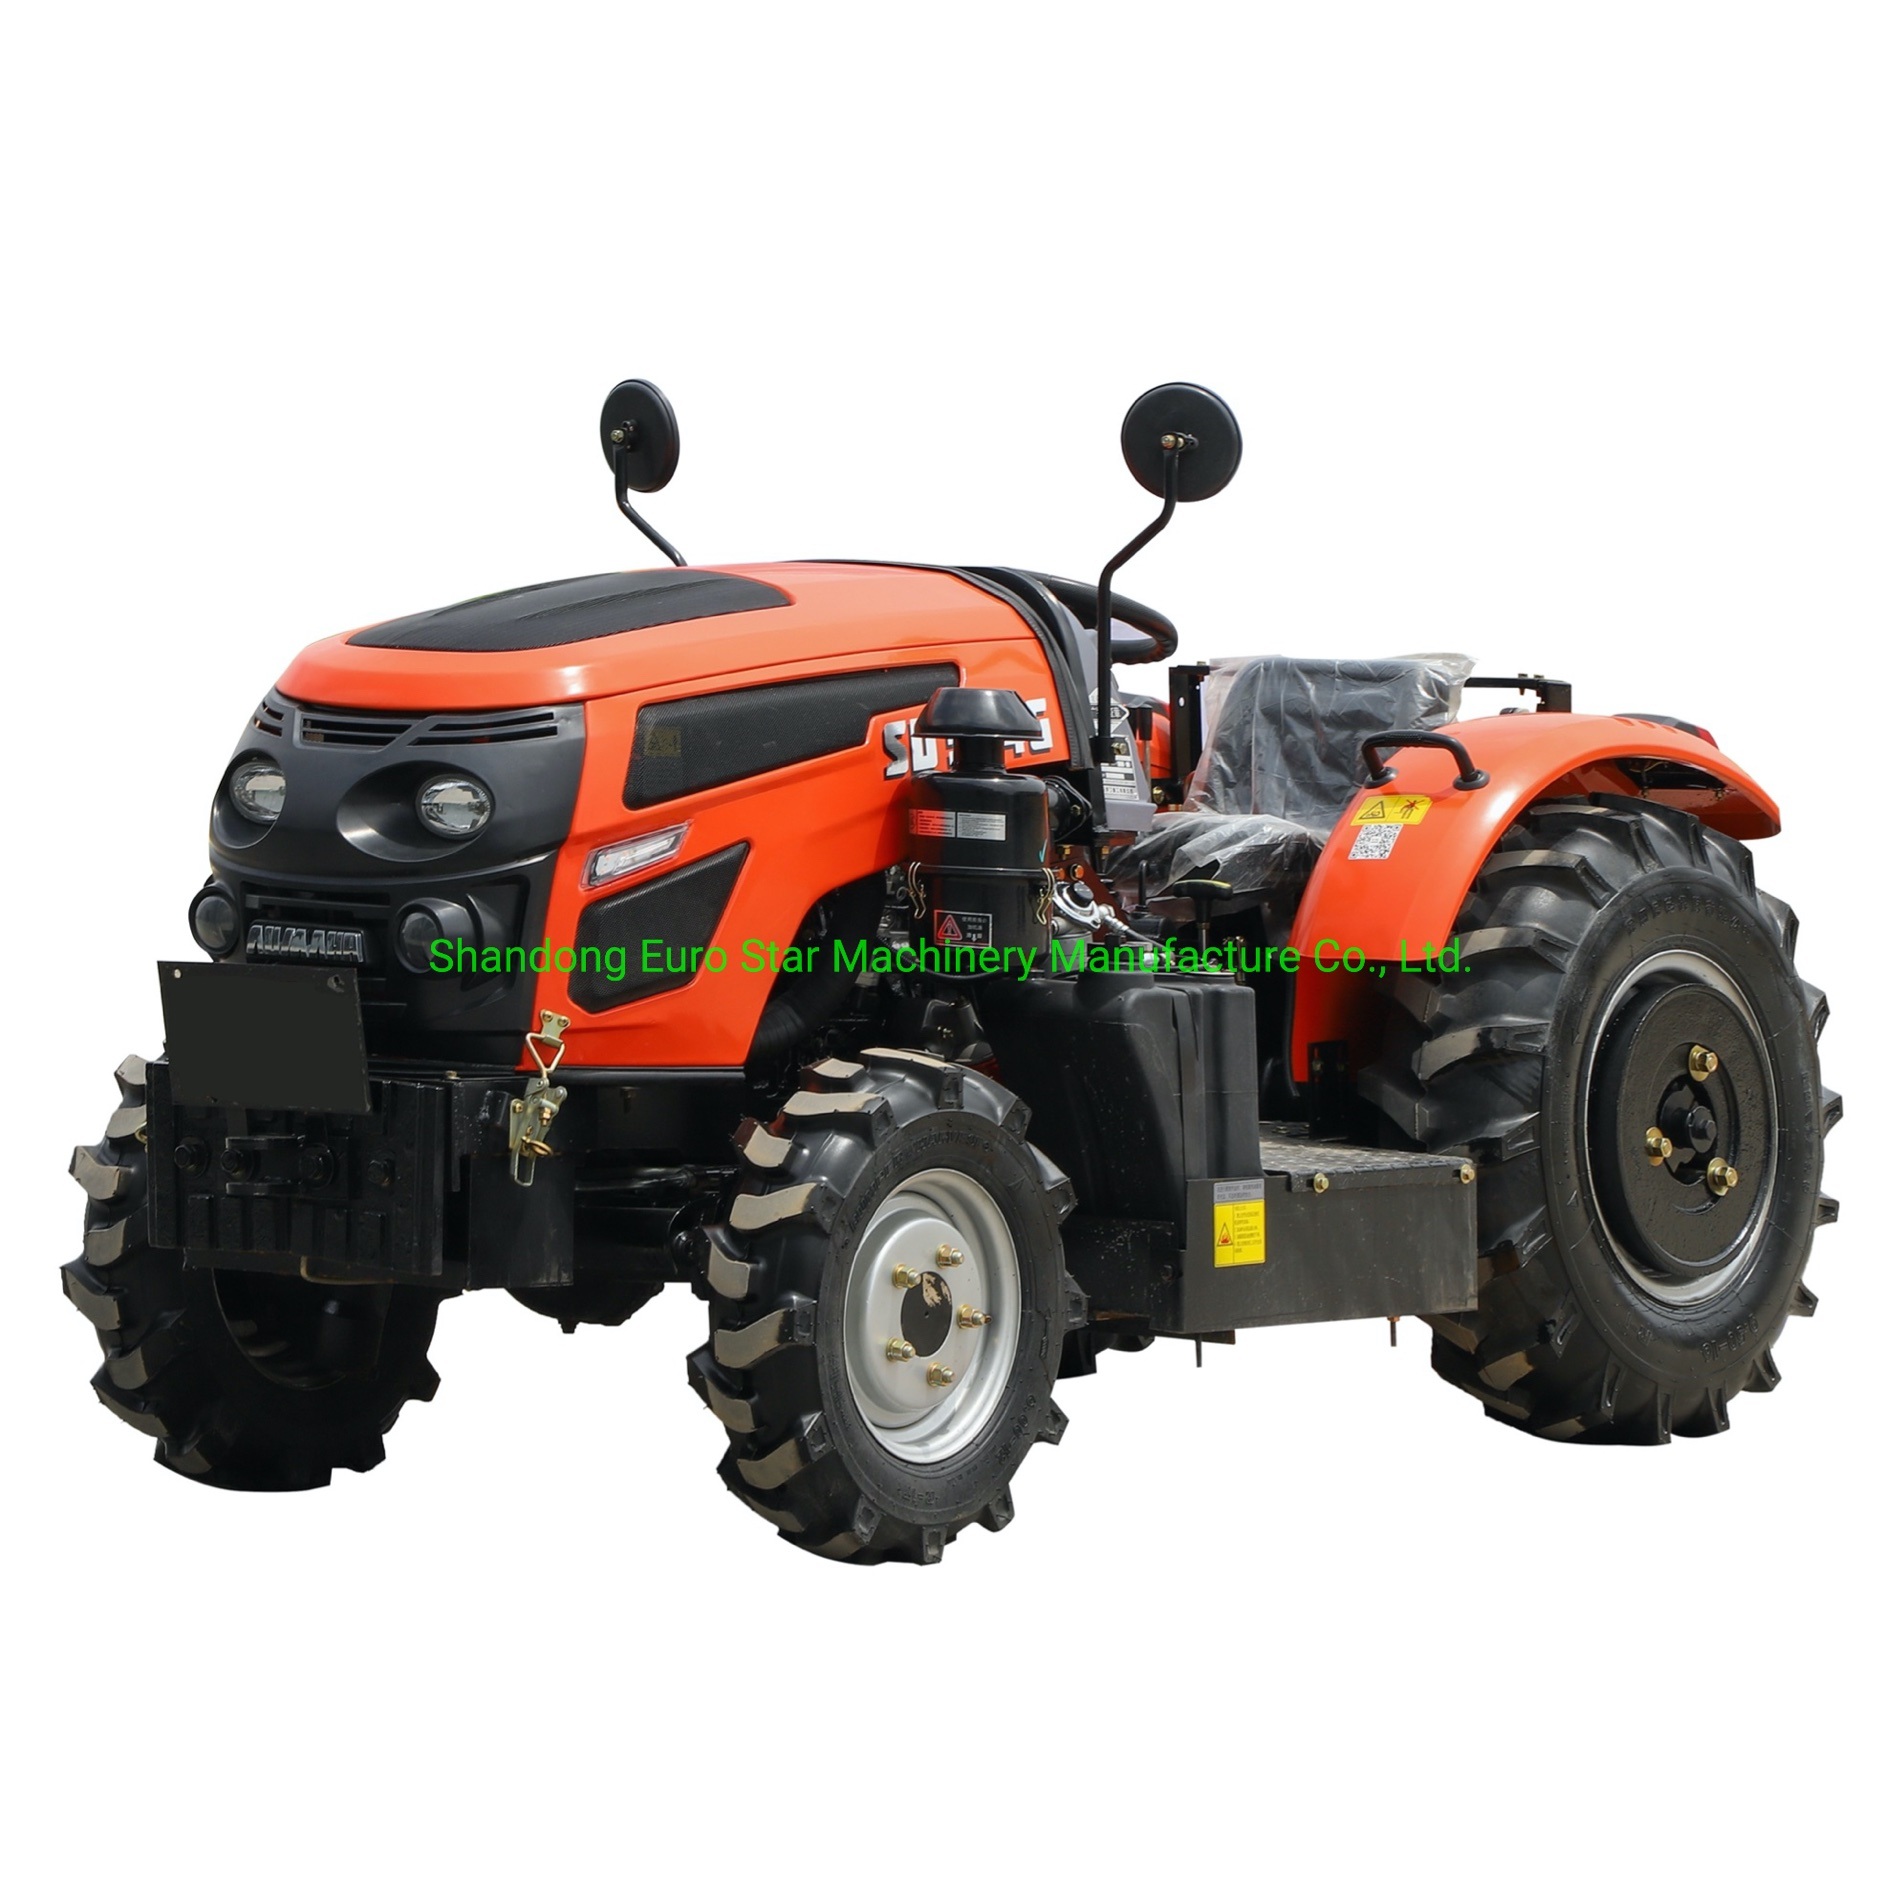 G-4WD-50HP-Mini-Orchard-Tractor-Small-Four-Wheel-Farm-Crawler-Paddy-Lawn-Big-Garden-Walking-Diesel-China-Tractor-for-Agricultural-Machinery-Machine-Es5048g-CE (3).jpg